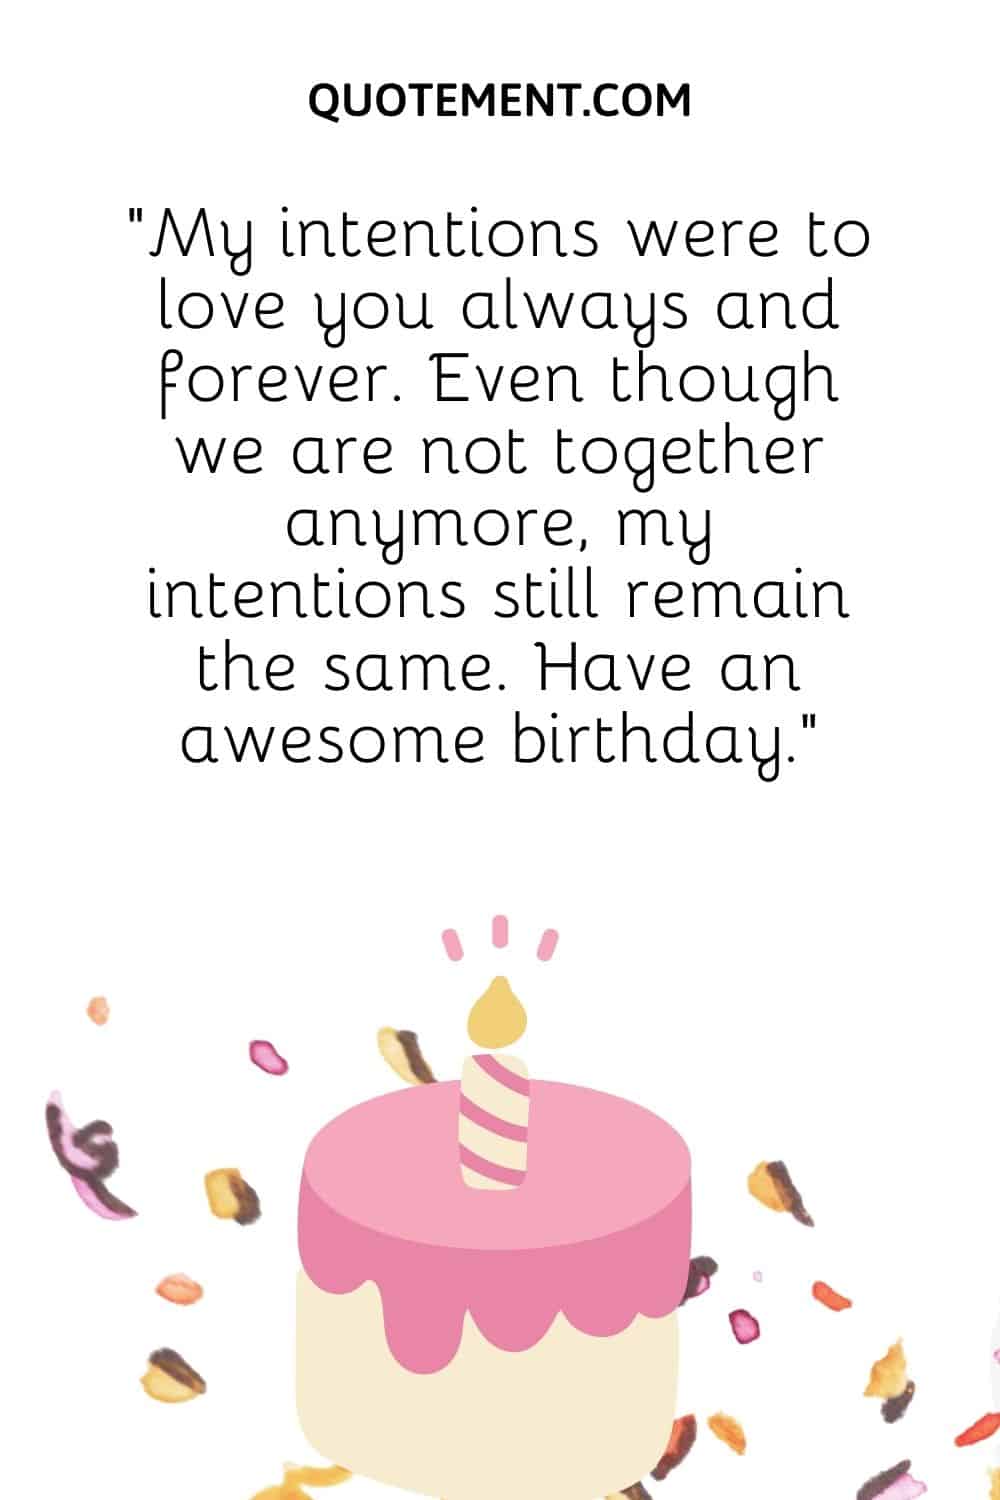 “My intentions were to love you always and forever. Even though we are not together anymore, my intentions still remain the same. Have an awesome birthday.”